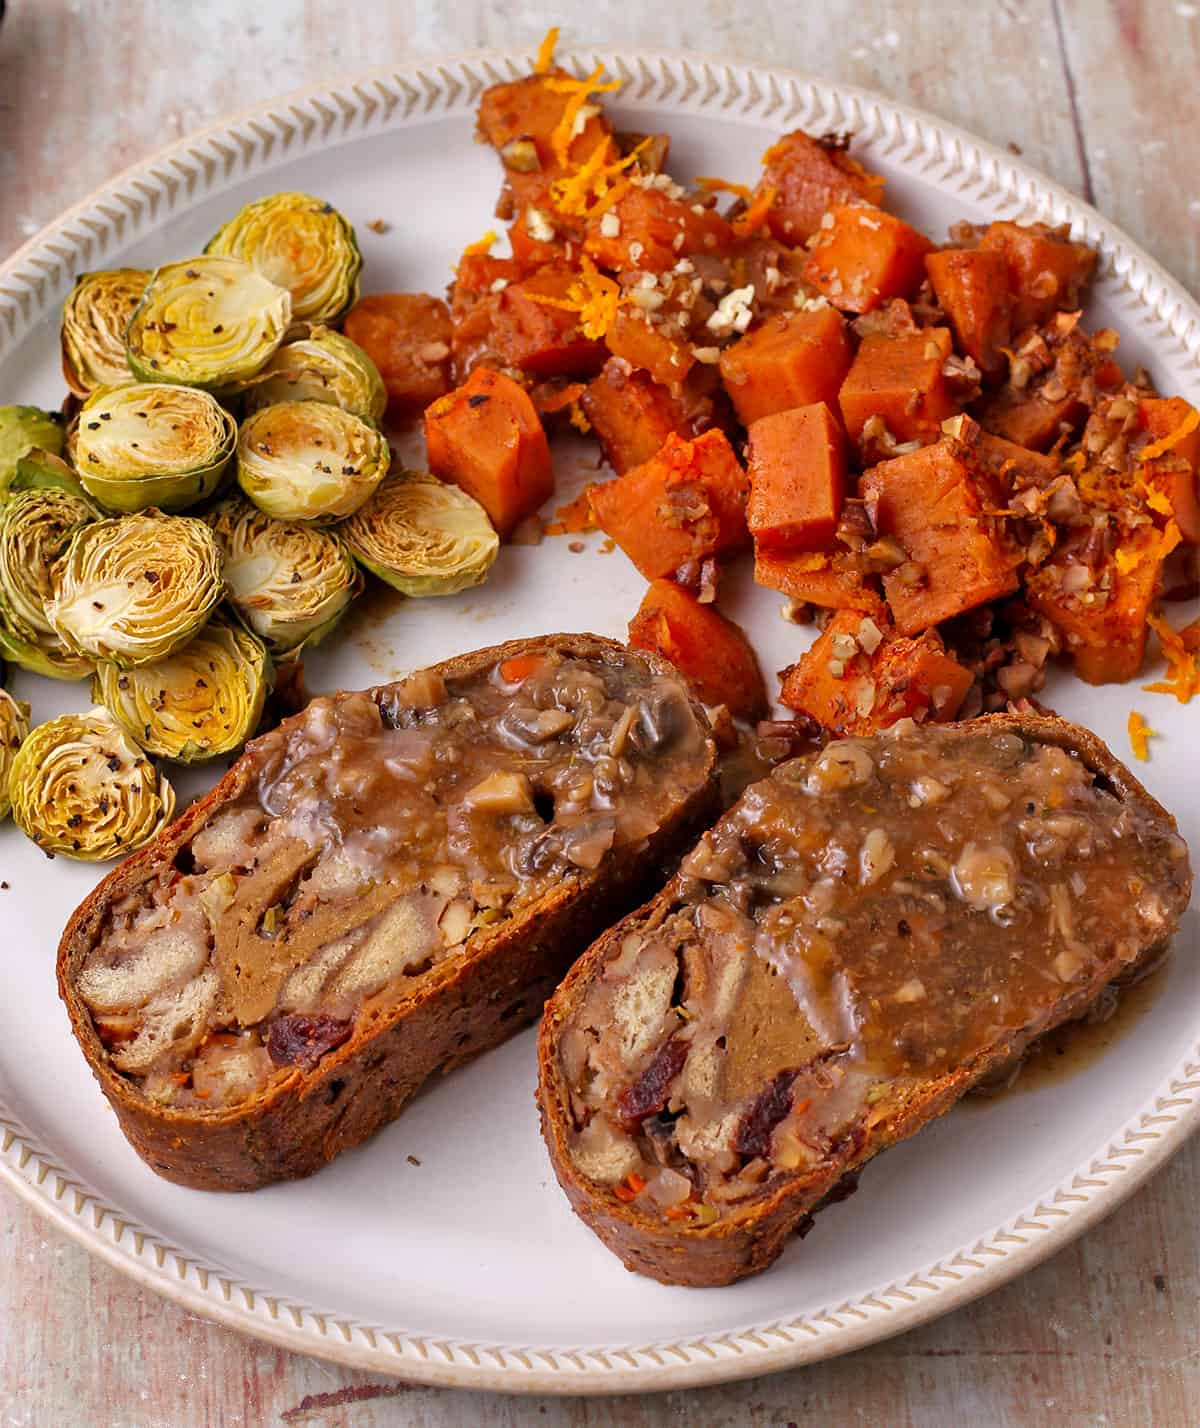 Stuffed seitan roast slices with gravy with diced sweet potatoes and roasted Brussels sprouts on a white plate.